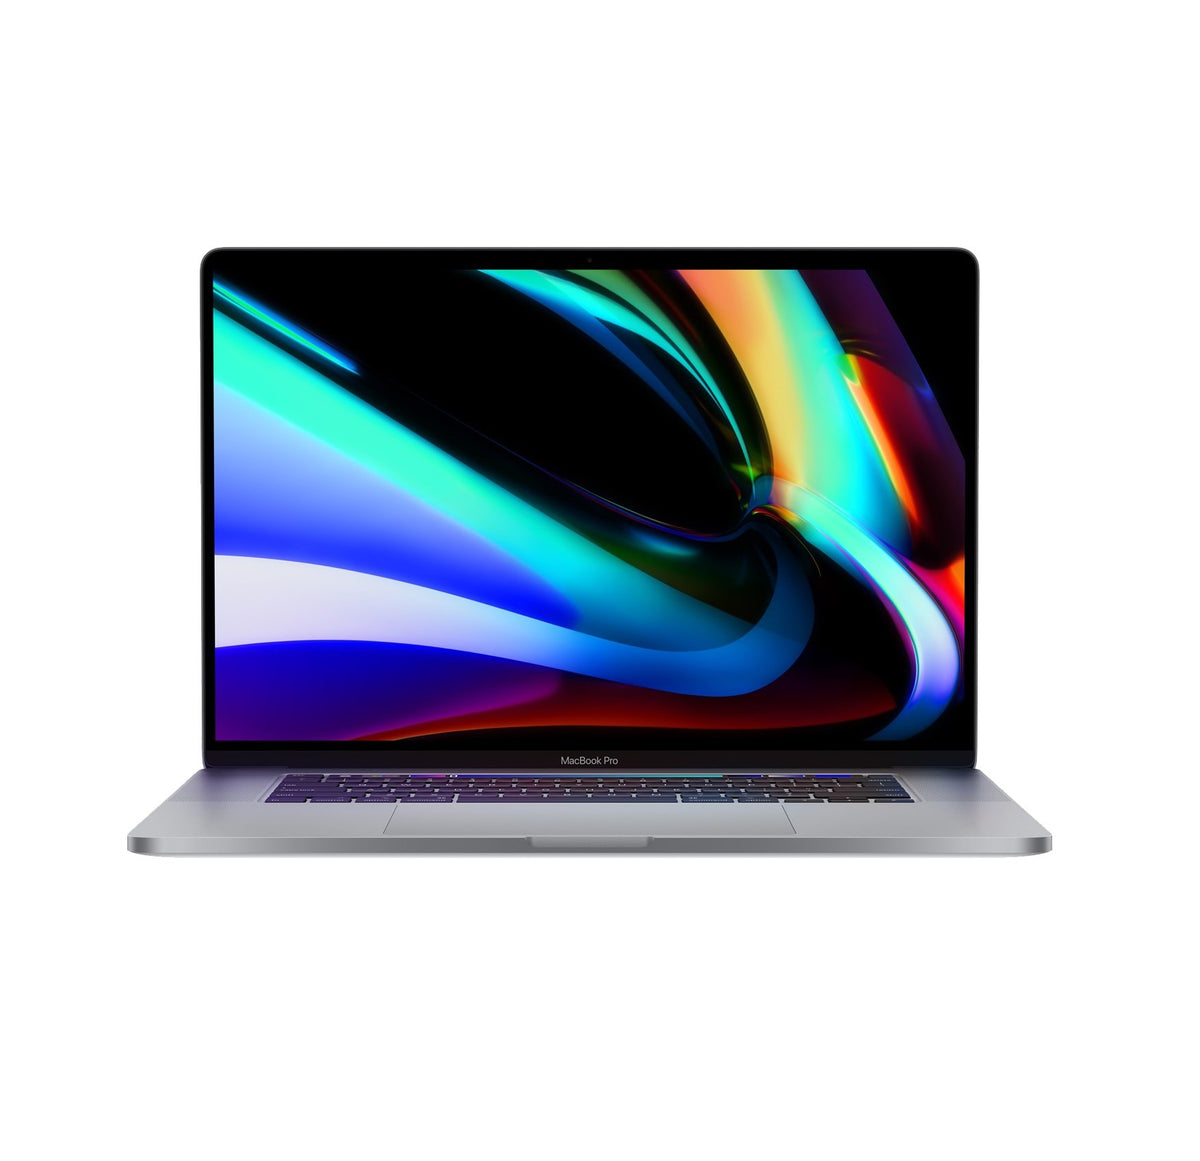 radeon pro graphics card in macbook pro 2017 not showing up